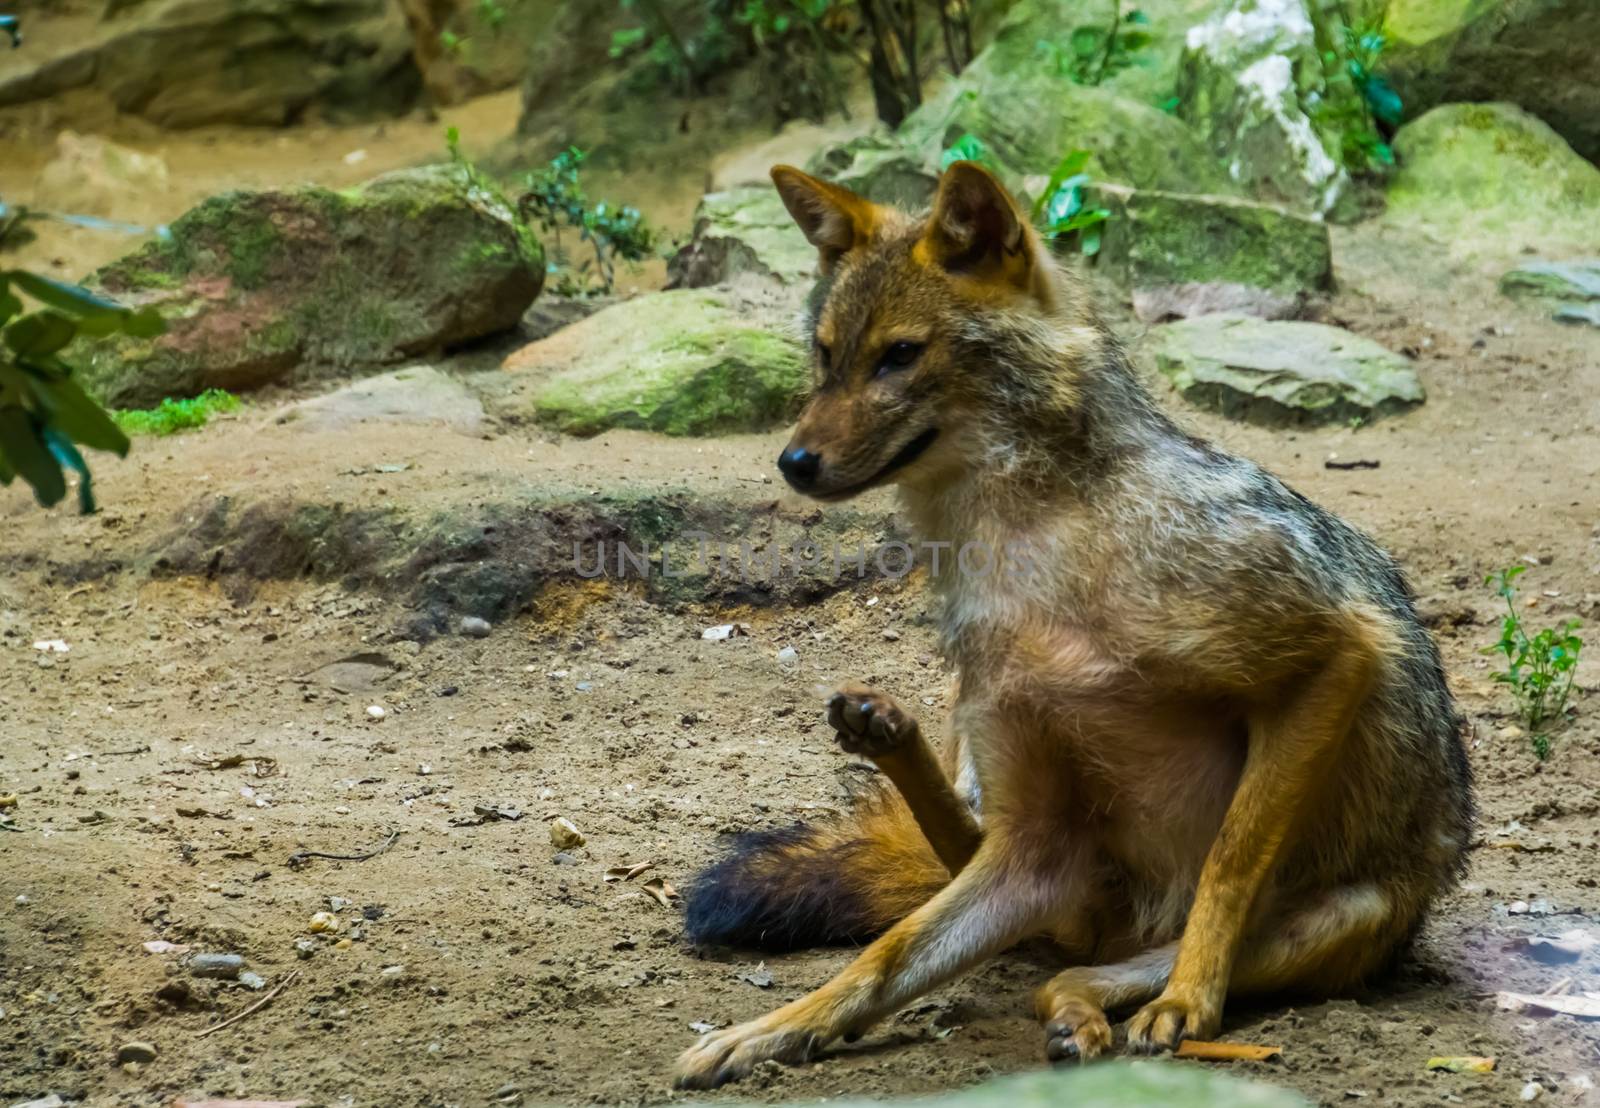 closeup of a golden jackal sitting on the ground, Wild dog specie from Eurasia